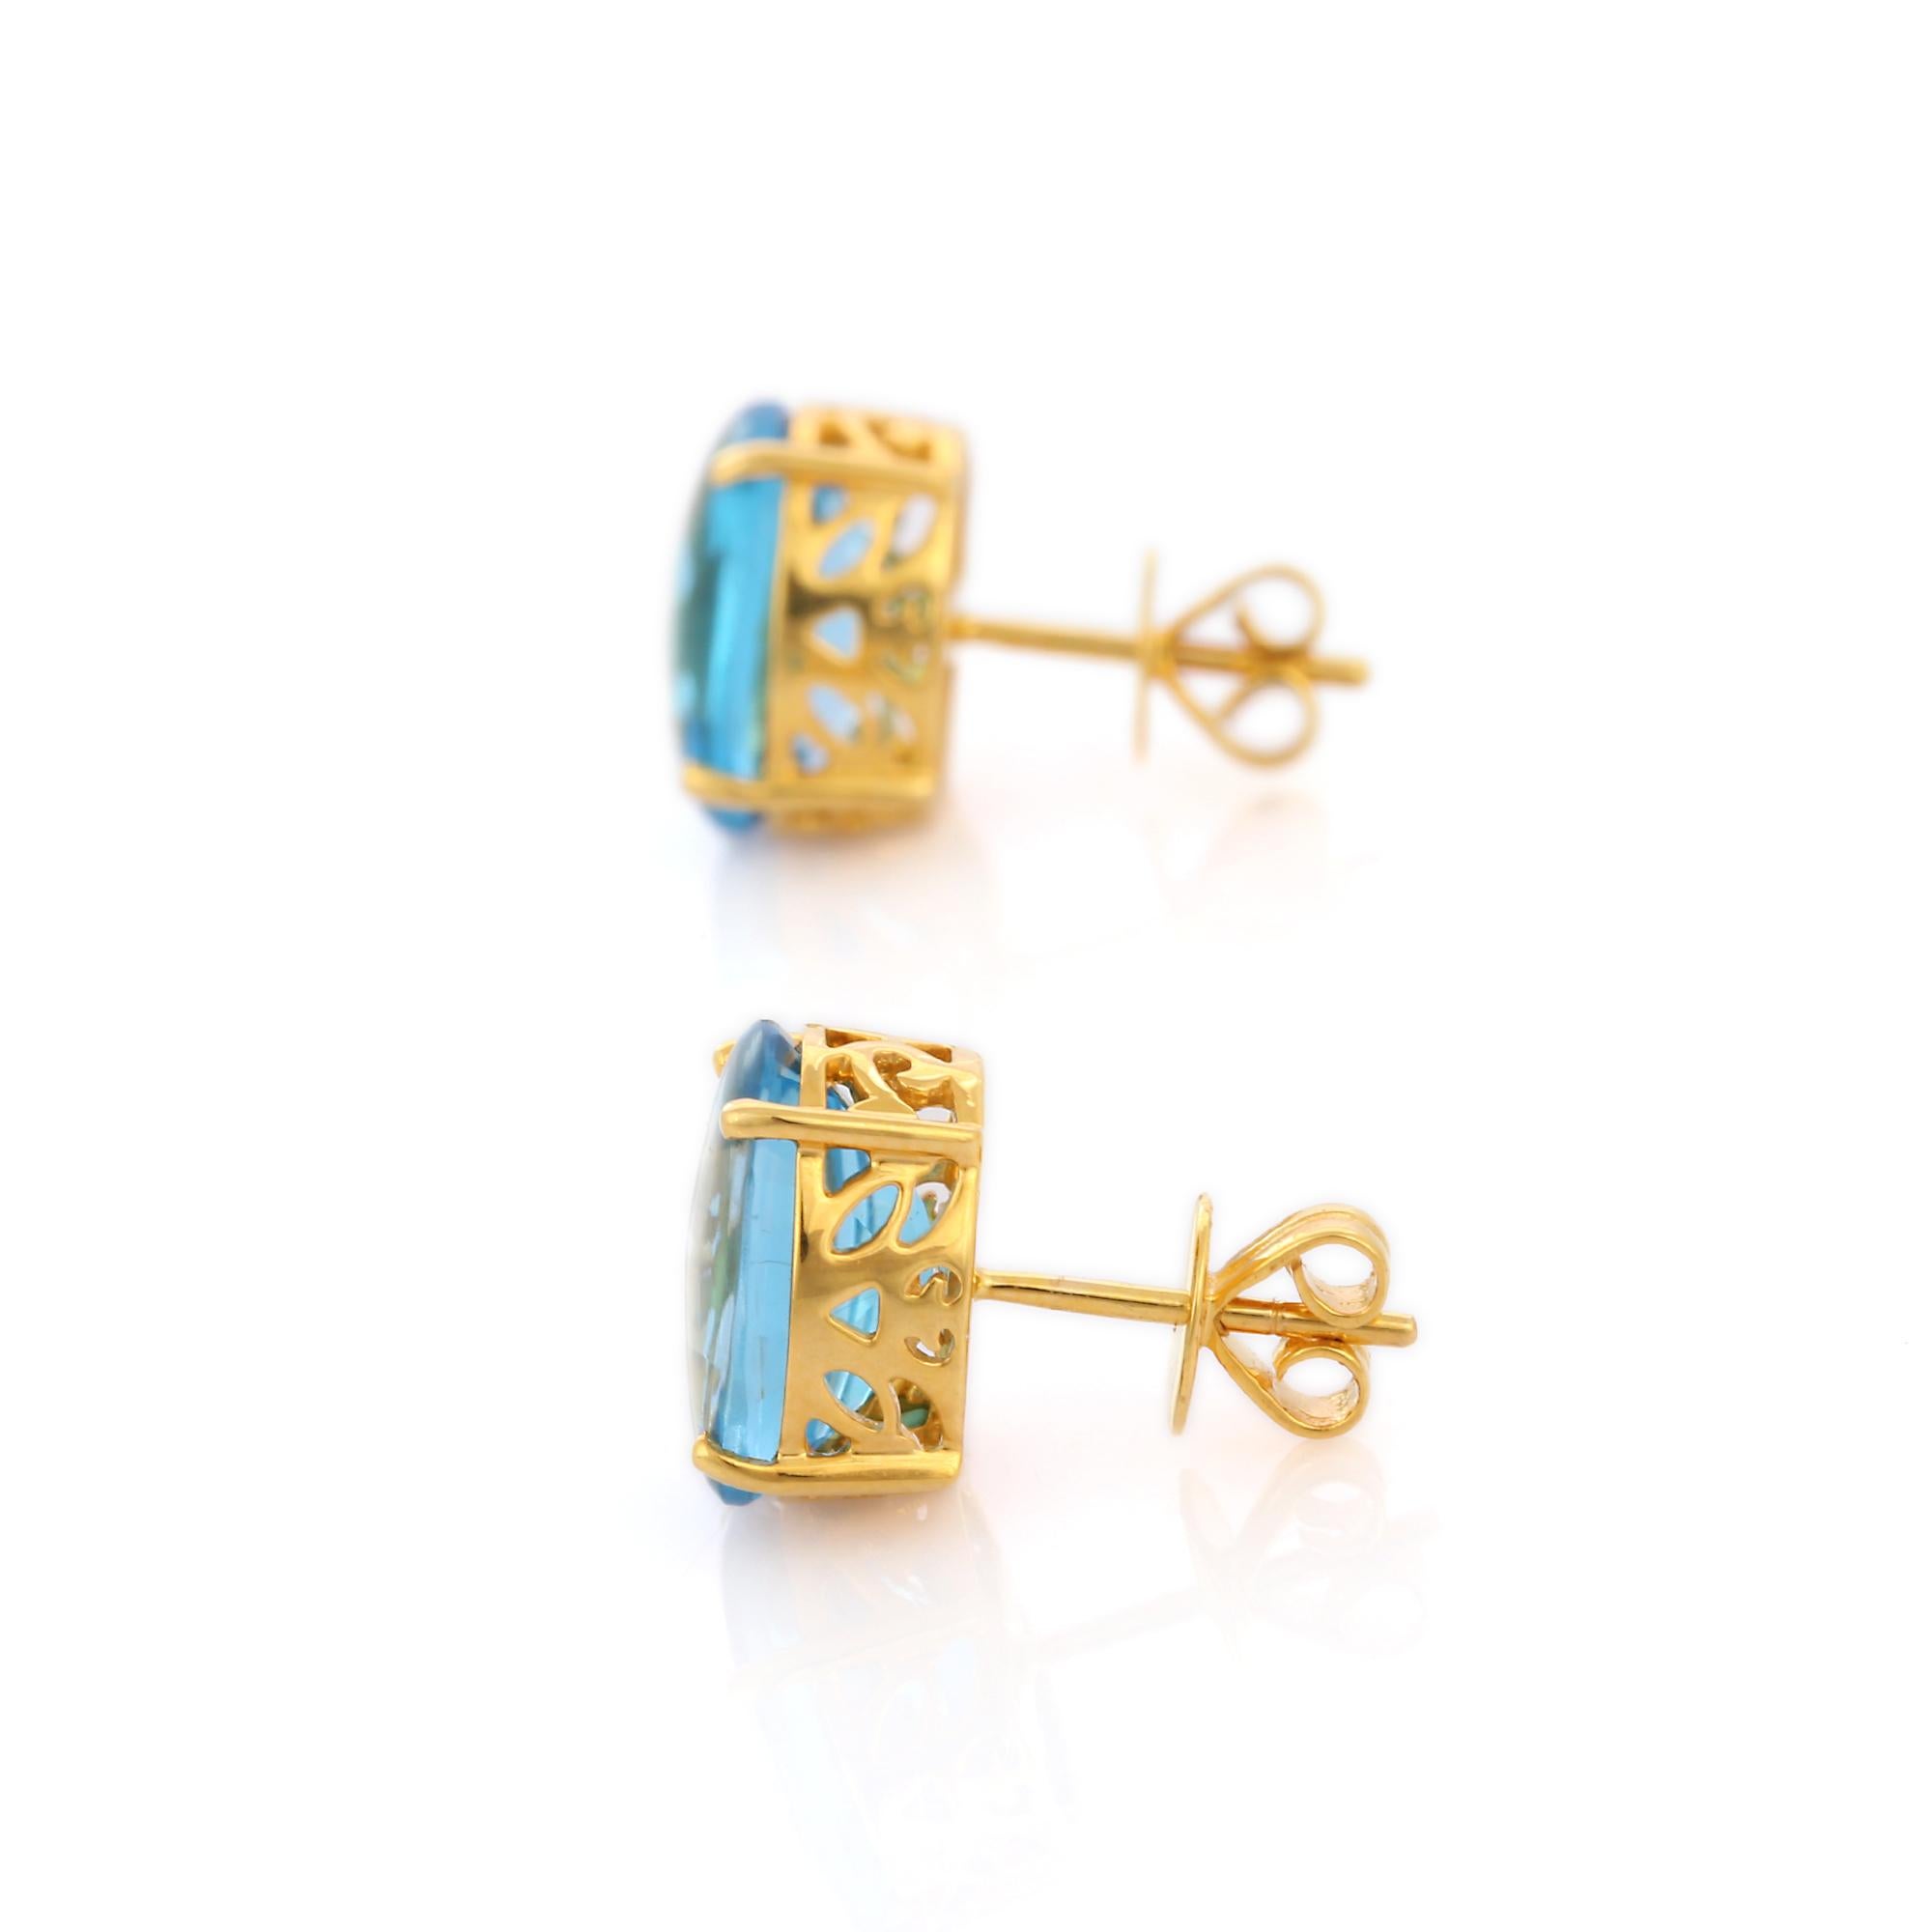 Studs create a subtle beauty while showcasing the colors of the natural precious gemstones and illuminating diamonds making a statement.

Oval cut blue topaz studs in 18K gold. Embrace your look with these stunning pair of earrings suitable for any